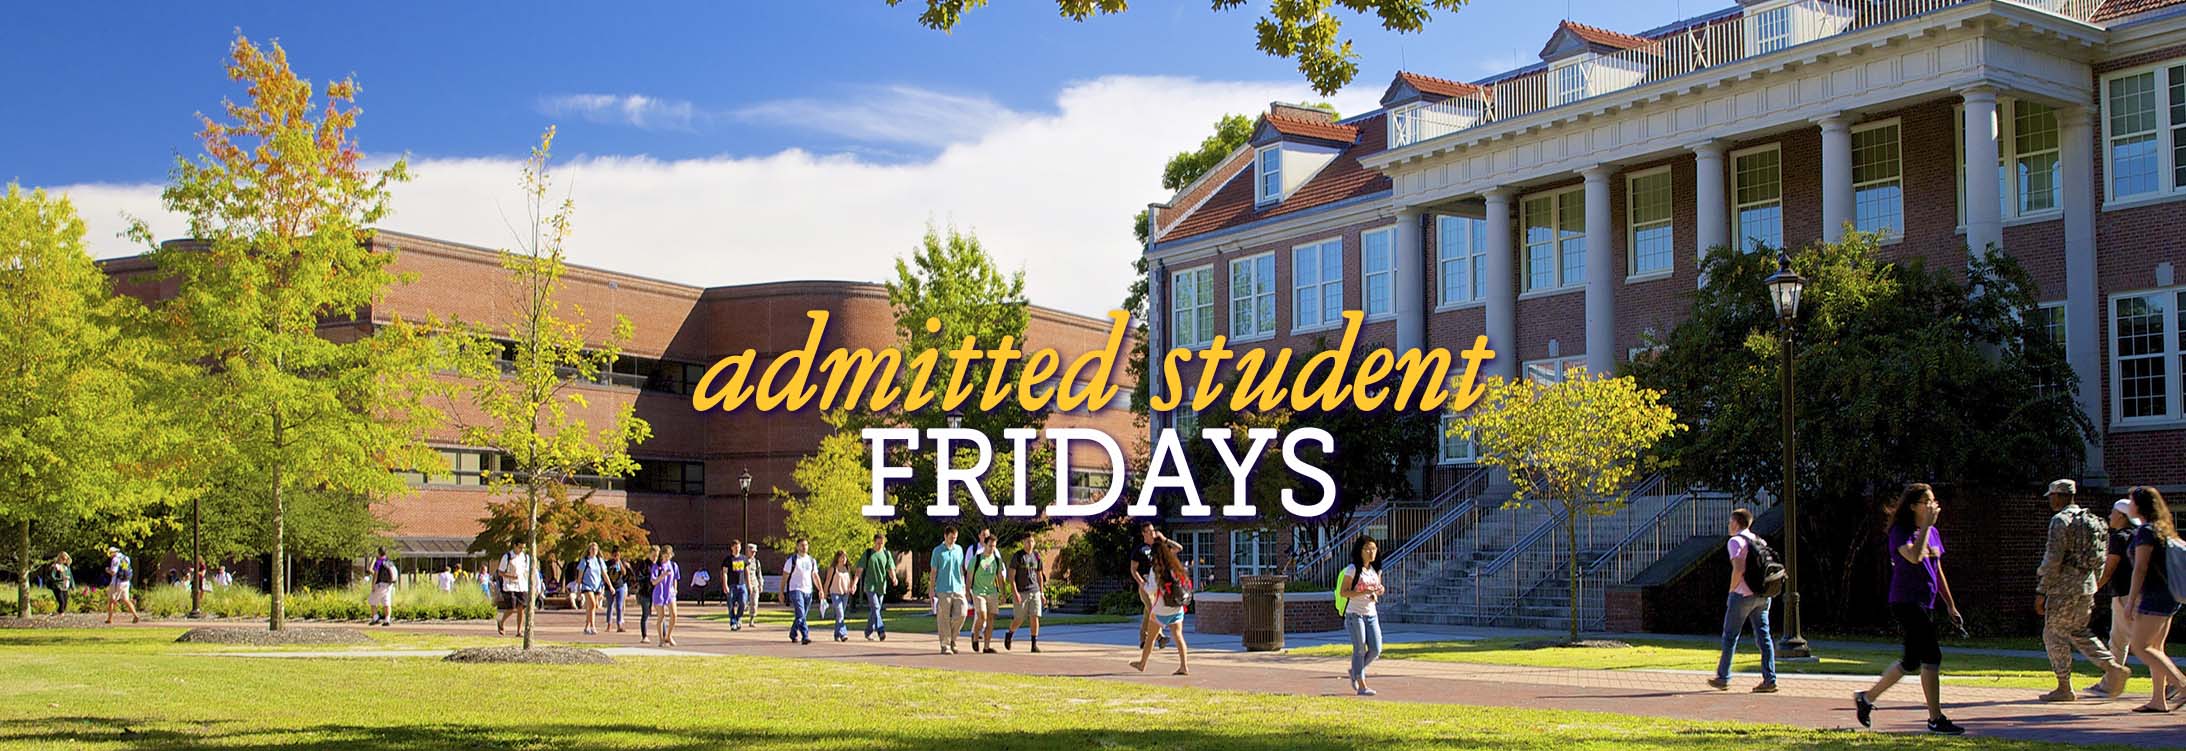 Admitted Student Fridays